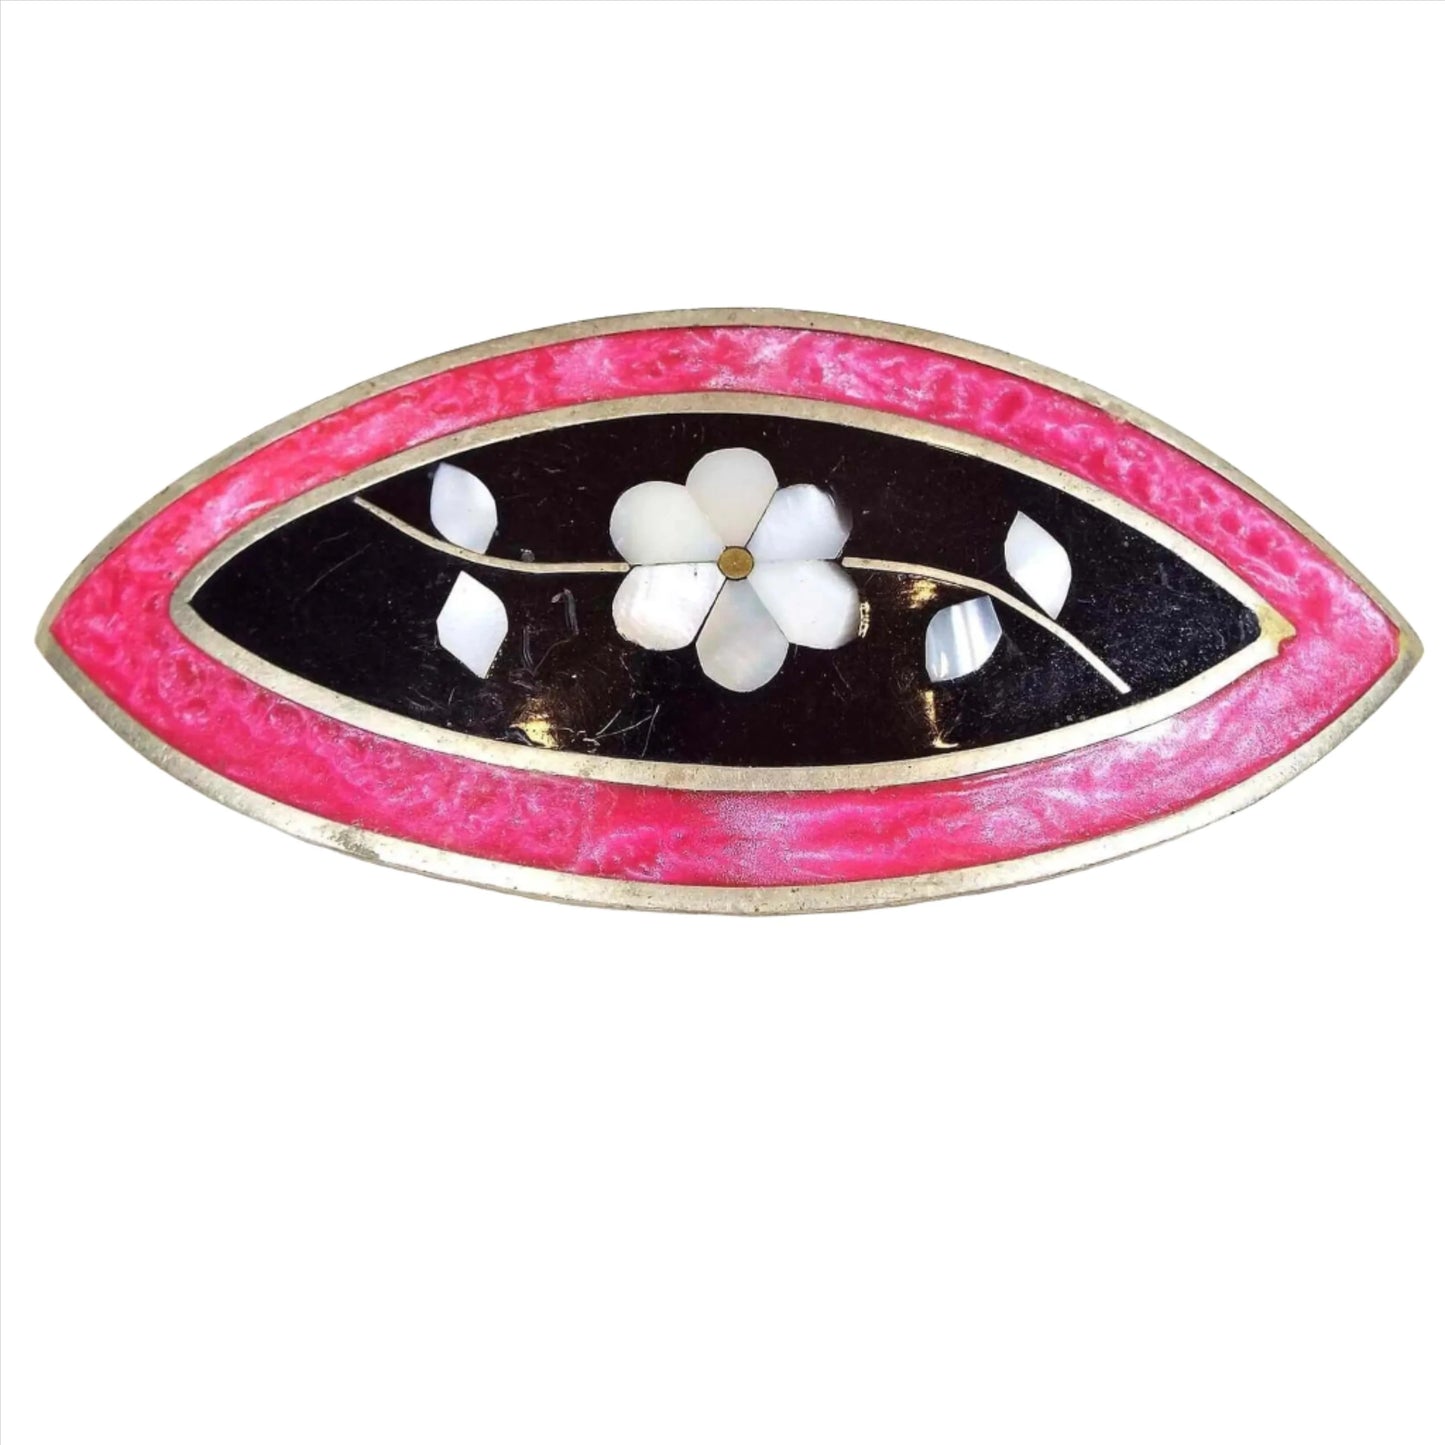 Front view of the retro vintage mexican hair clip. It is a large marquis shaped piece with silver tone color metal. The inside area has black enamel with pearly white pieces of inlaid mother of pearl shell to form a floral design with a set of leaves on each side of the flower. The other edge has pink pearly enamel.